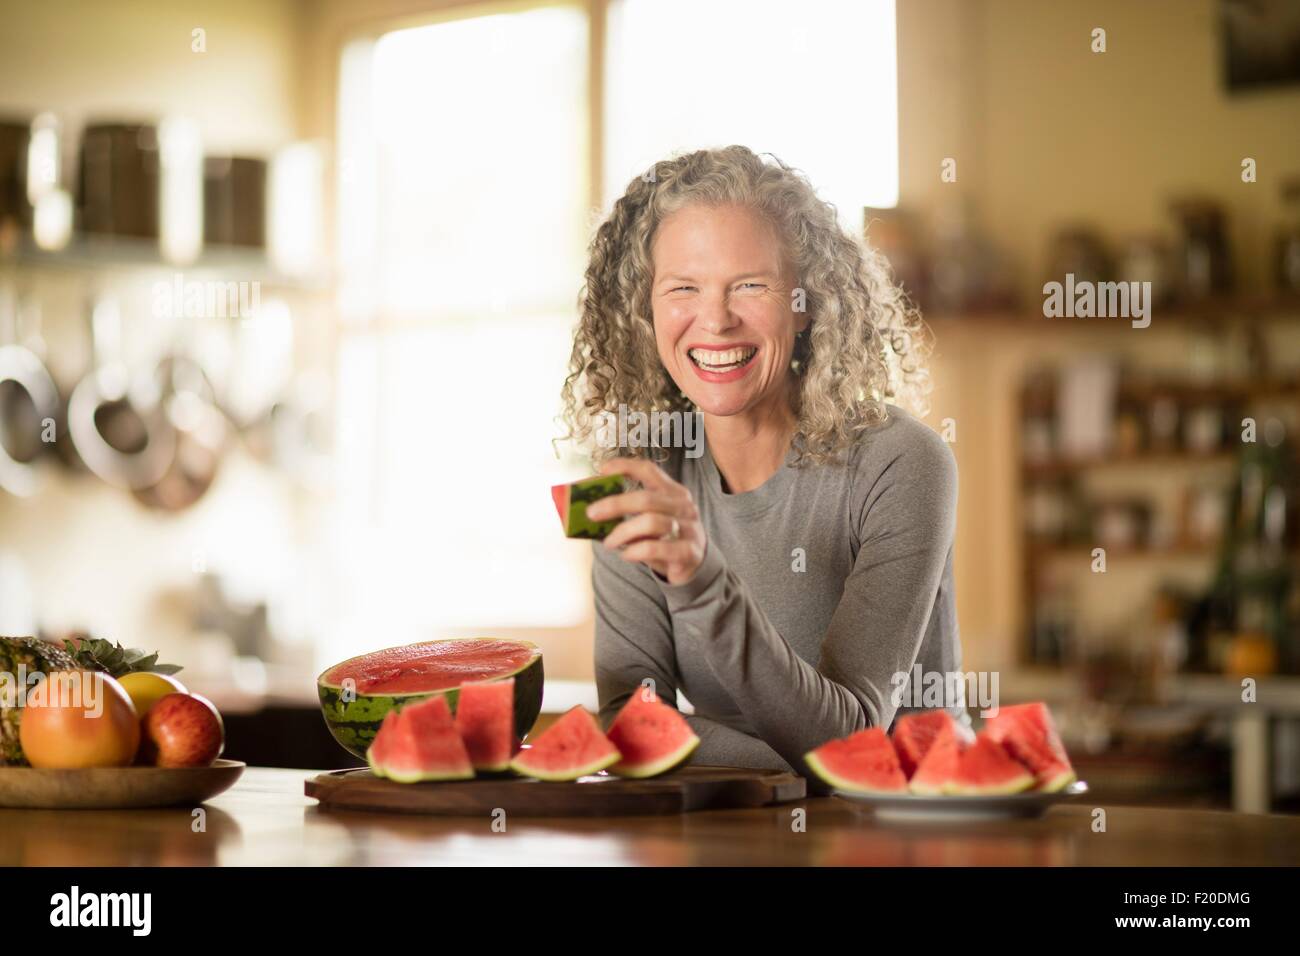 Portrait of young woman eating watermelon in kitchen Banque D'Images